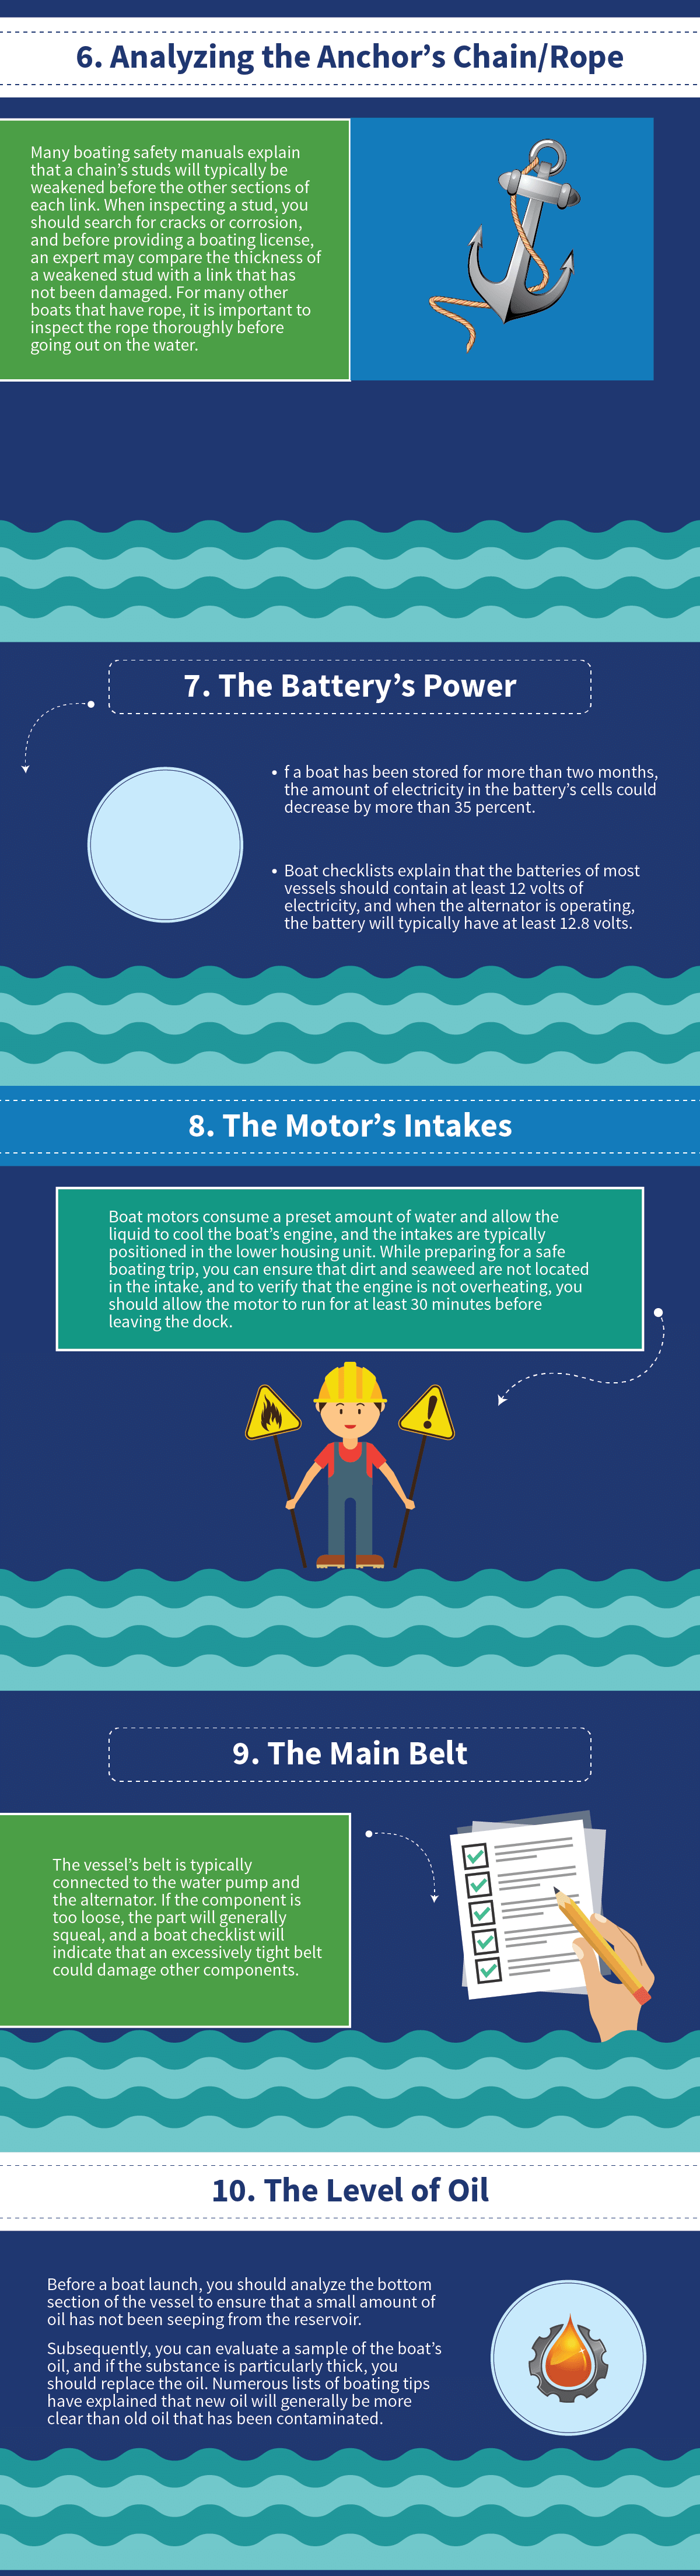 https://www.goldeagle.com/wp-content/uploads/2015/06/Inspecting-Your-Boat-Infographic_6-10-min.png